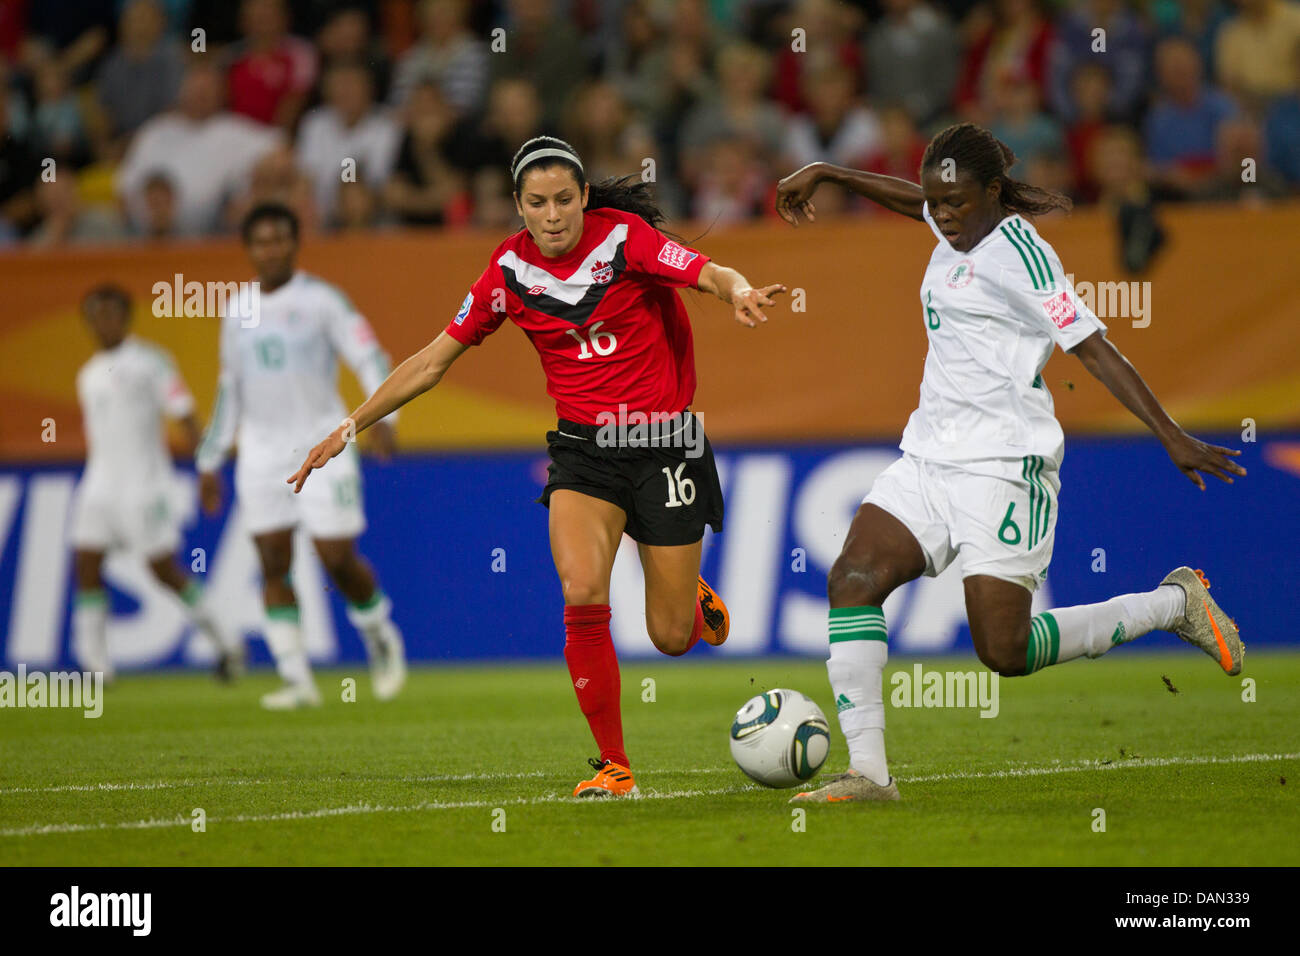 Helen Ukaonu (R) of Nigeria and Jonelle Filigno (L) of Canada fight for the ball during the Group A match Canada against Nigeria of FIFA Women's World Cup soccer tournament at the Rudolf Harbig Stadium in Dresden, Germany, 05 July 2011. Foto: Jens Wolf dpa/lsn  +++(c) dpa - Bildfunk+++ Stock Photo